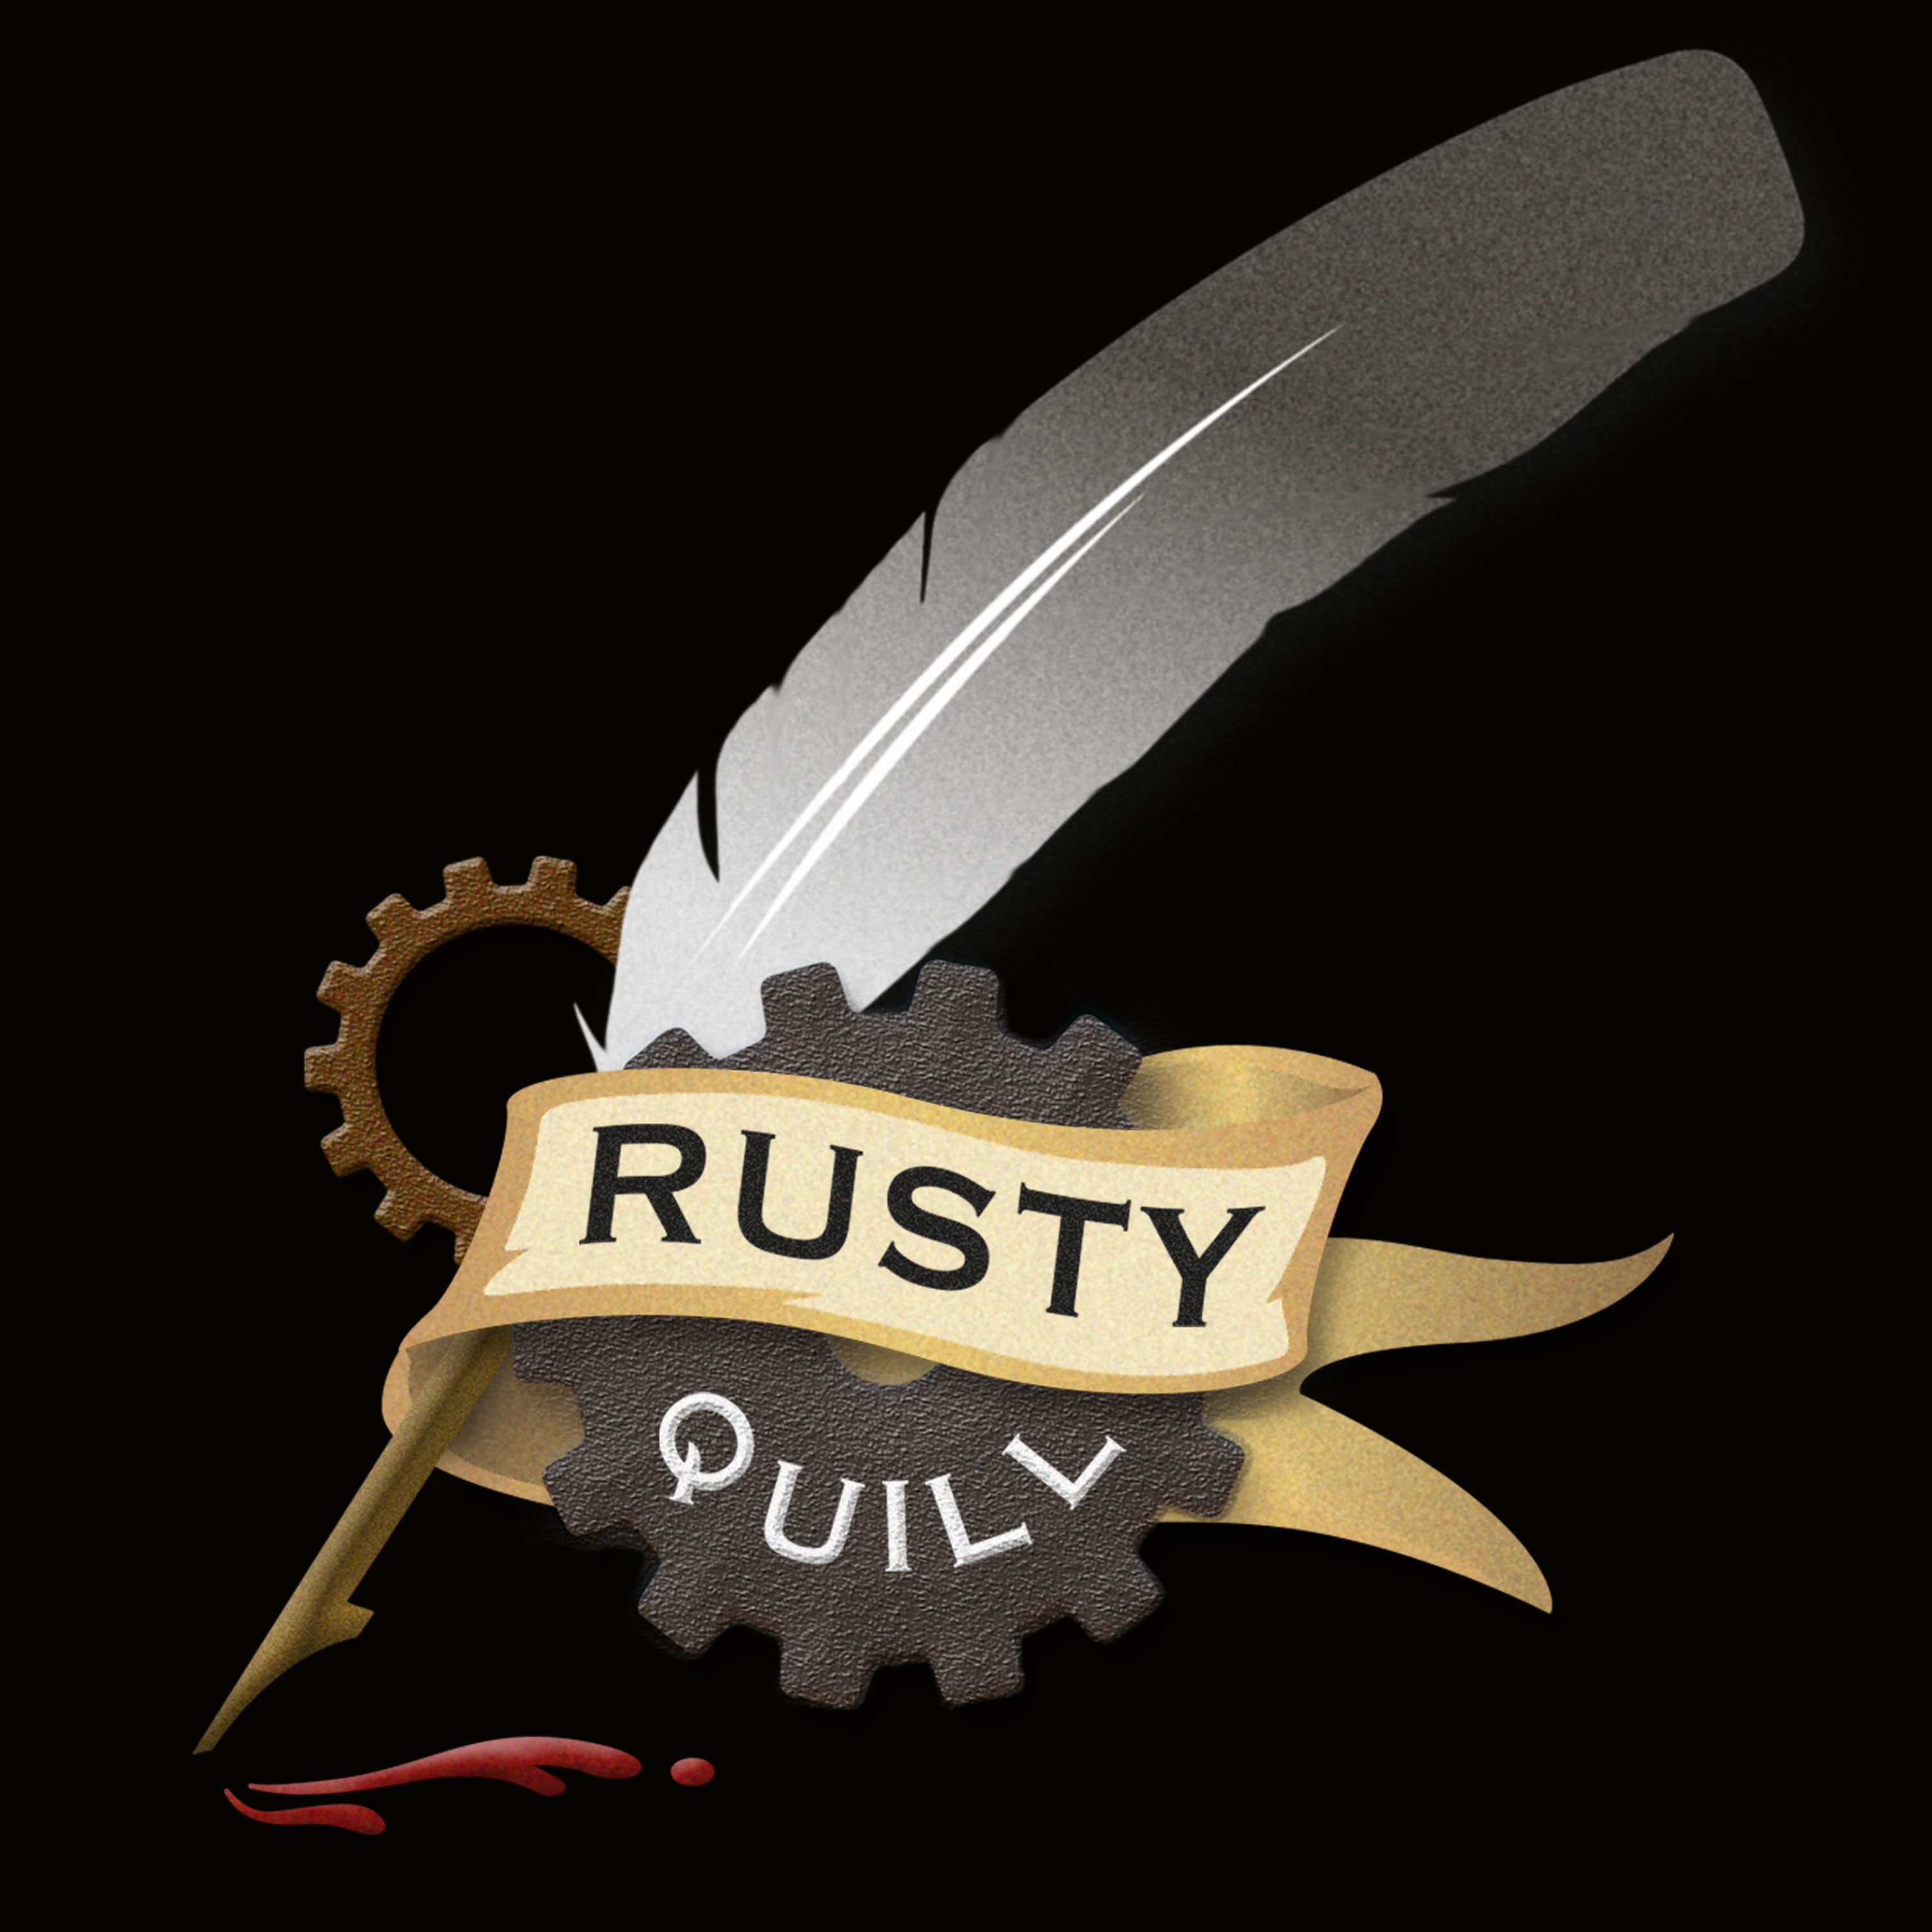 The Magnus Archives – Rusty Quill